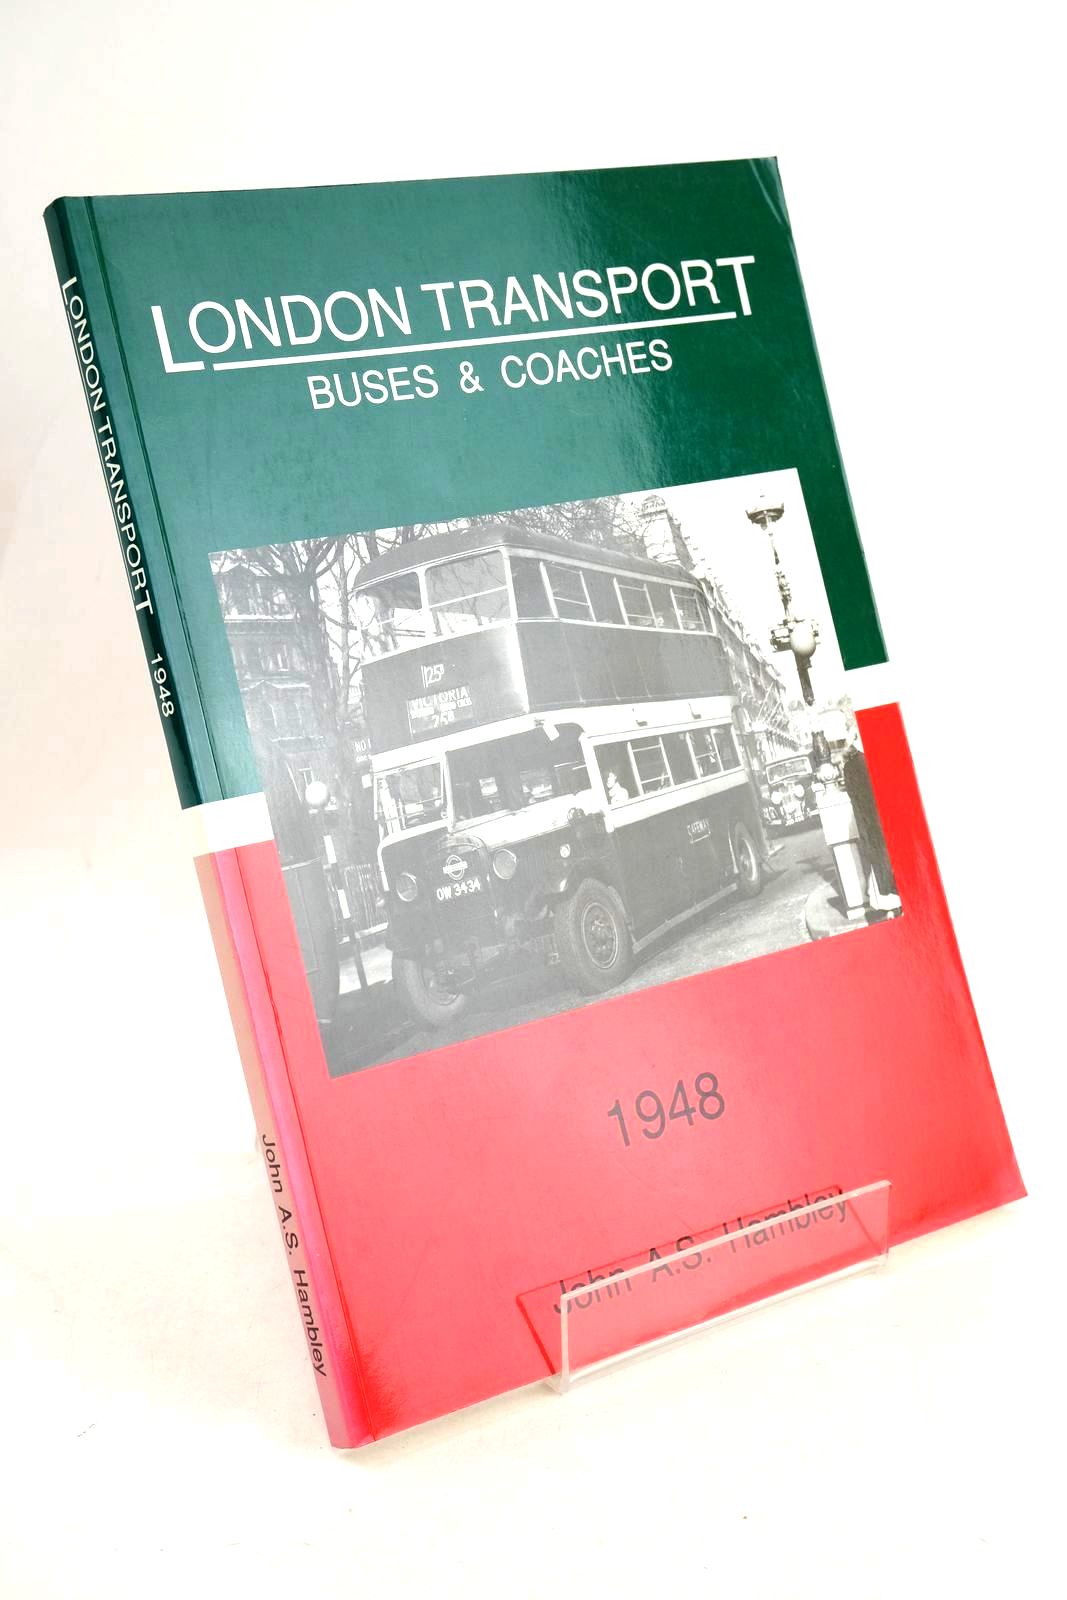 Photo of LONDON TRANSPORT BUSES & COACHES 1948 written by Hambley, John A.S. published by The Self Publishing Association Ltd. (STOCK CODE: 1327372)  for sale by Stella & Rose's Books